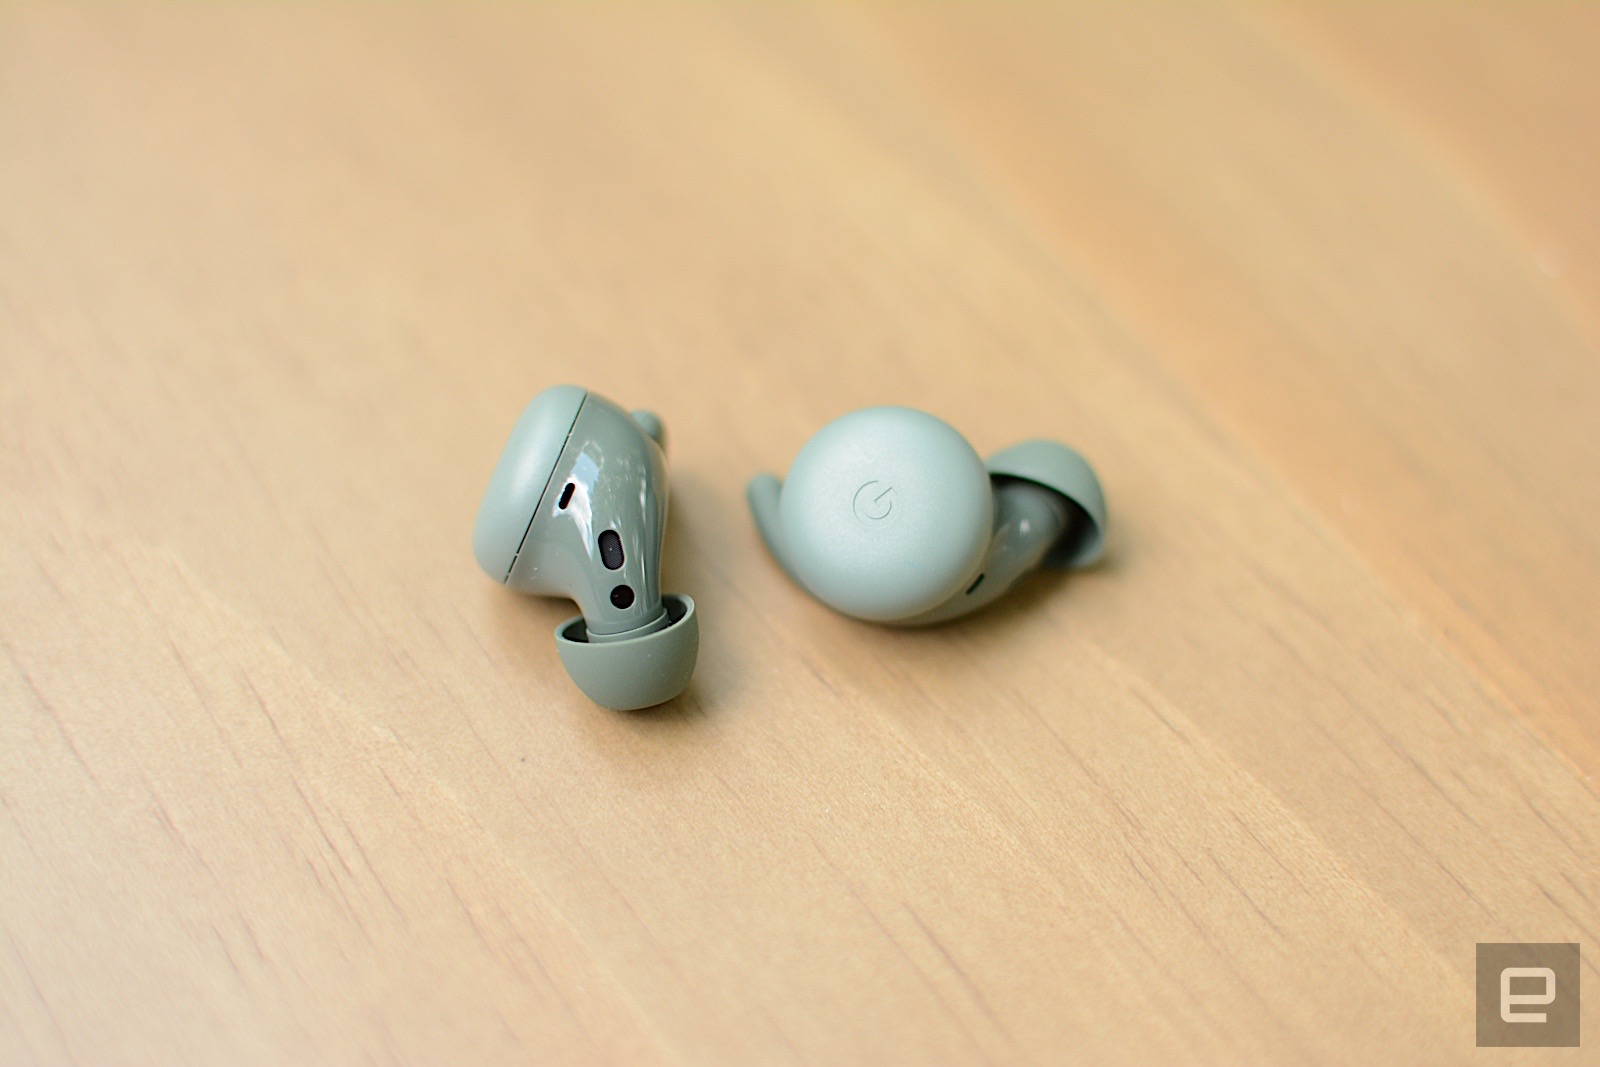 <p>Google’s latest true wireless earbuds are a $99 version of the Pixel Buds it debuted in 2020. Surprisingly, the company kept nearly all of the features that made those buds such a good option for users who prefer Google Assistant. The company did nix the on-board volume controls and Adaptive Sound is still no replacement for ANC, but there’s a lot to like here for the price.</p>
